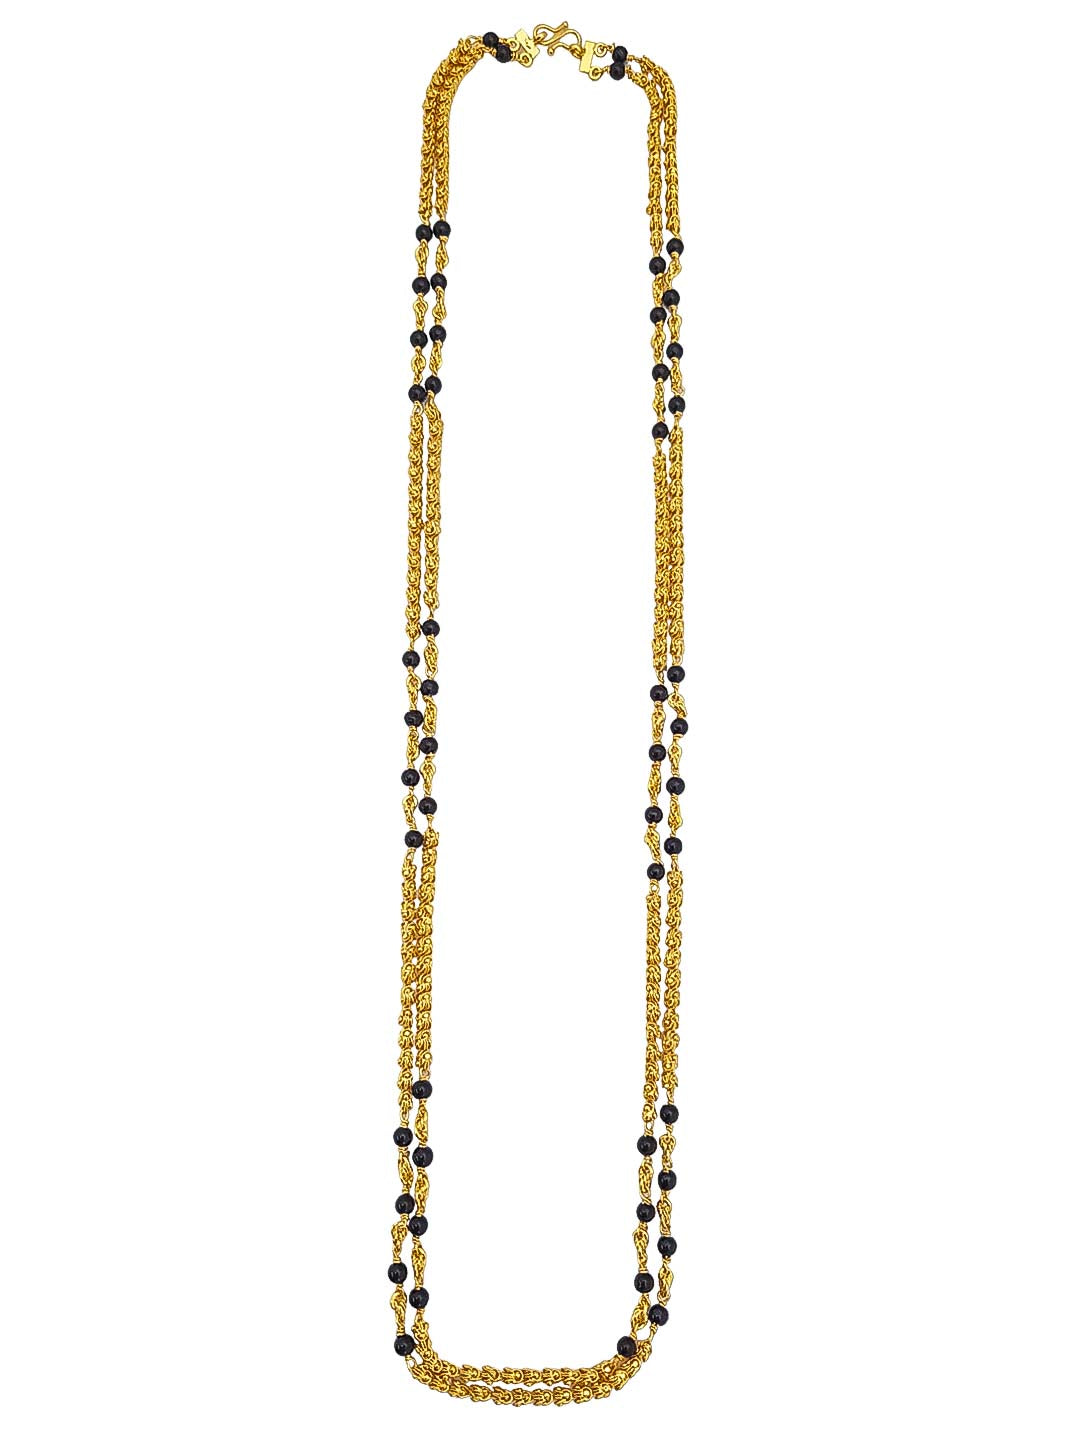 1 gm Microgold plating Black beads chain 30 inches 17362N